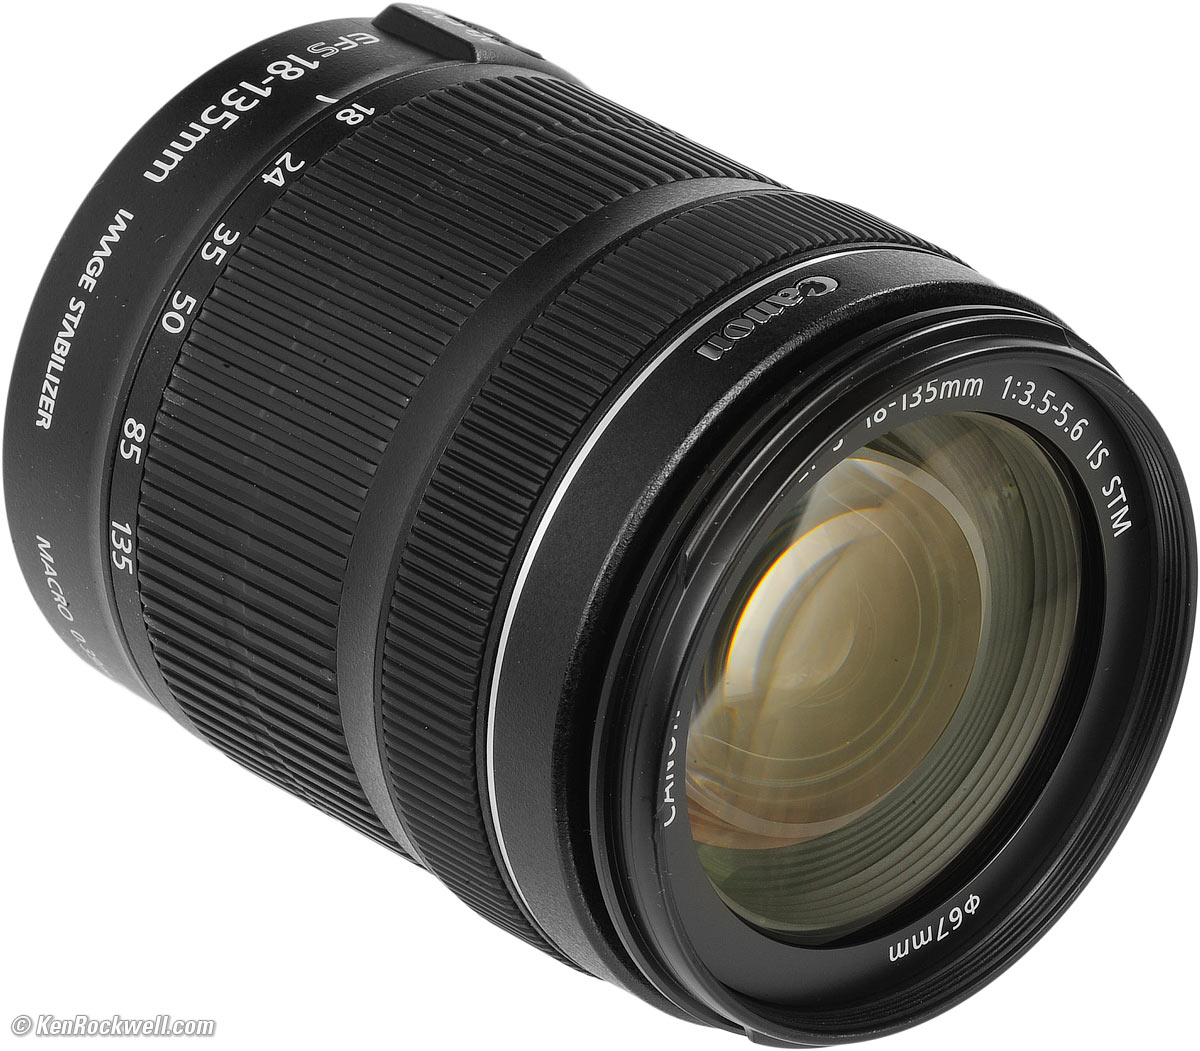 Canon 18-135mm STM Review